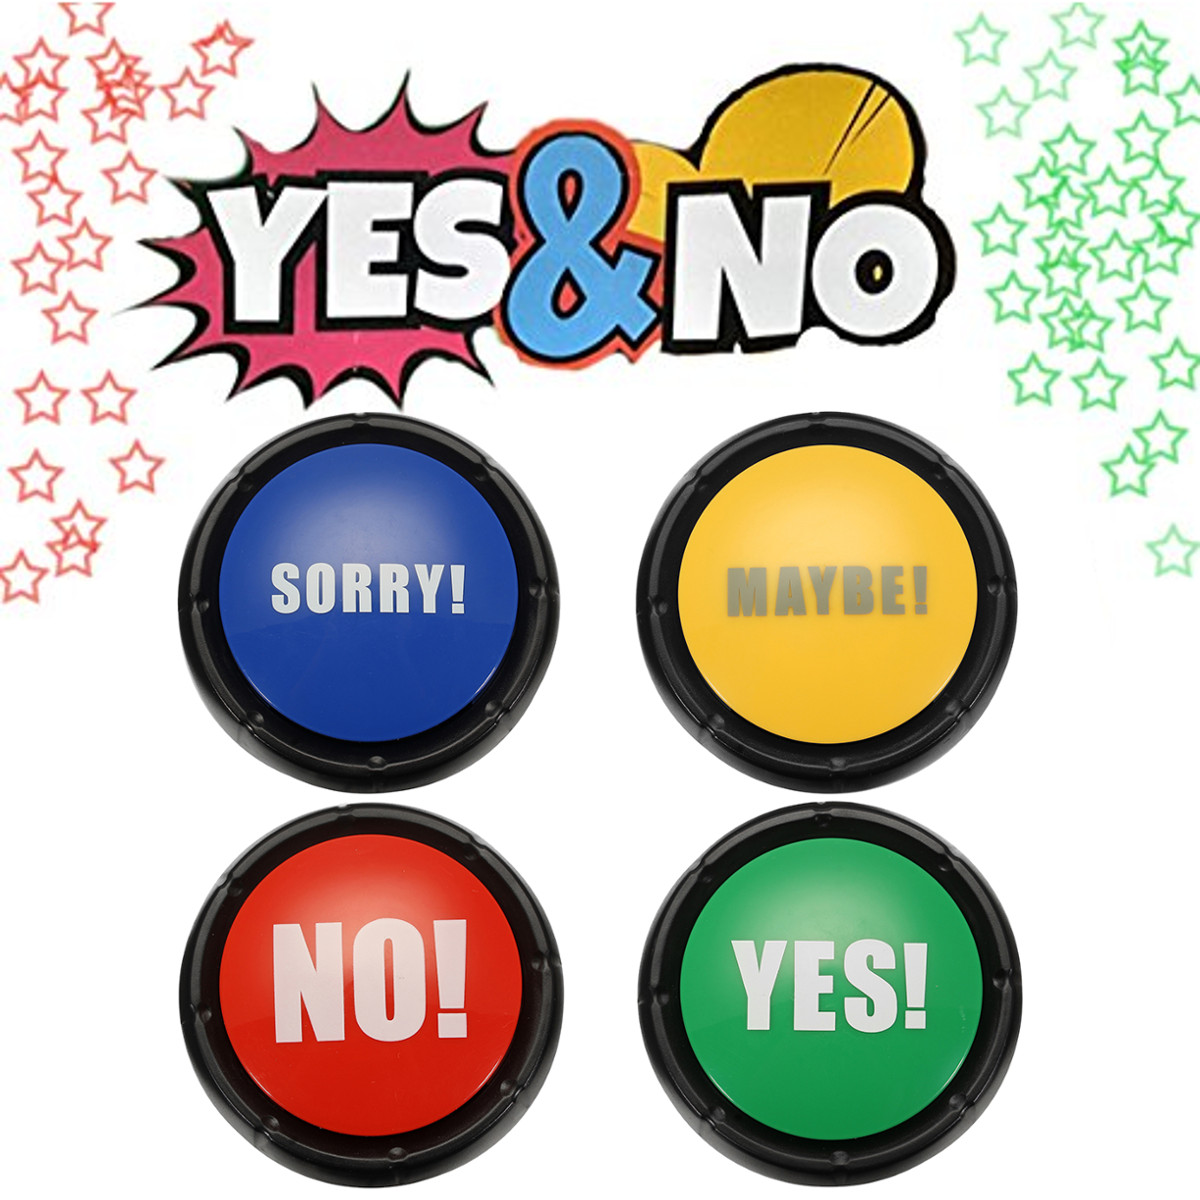 4pcs-NO-YES-MAYBE-SORRY-Sound-Button-Event-Game-Party-Tools-Holiday-Supplies-1200945